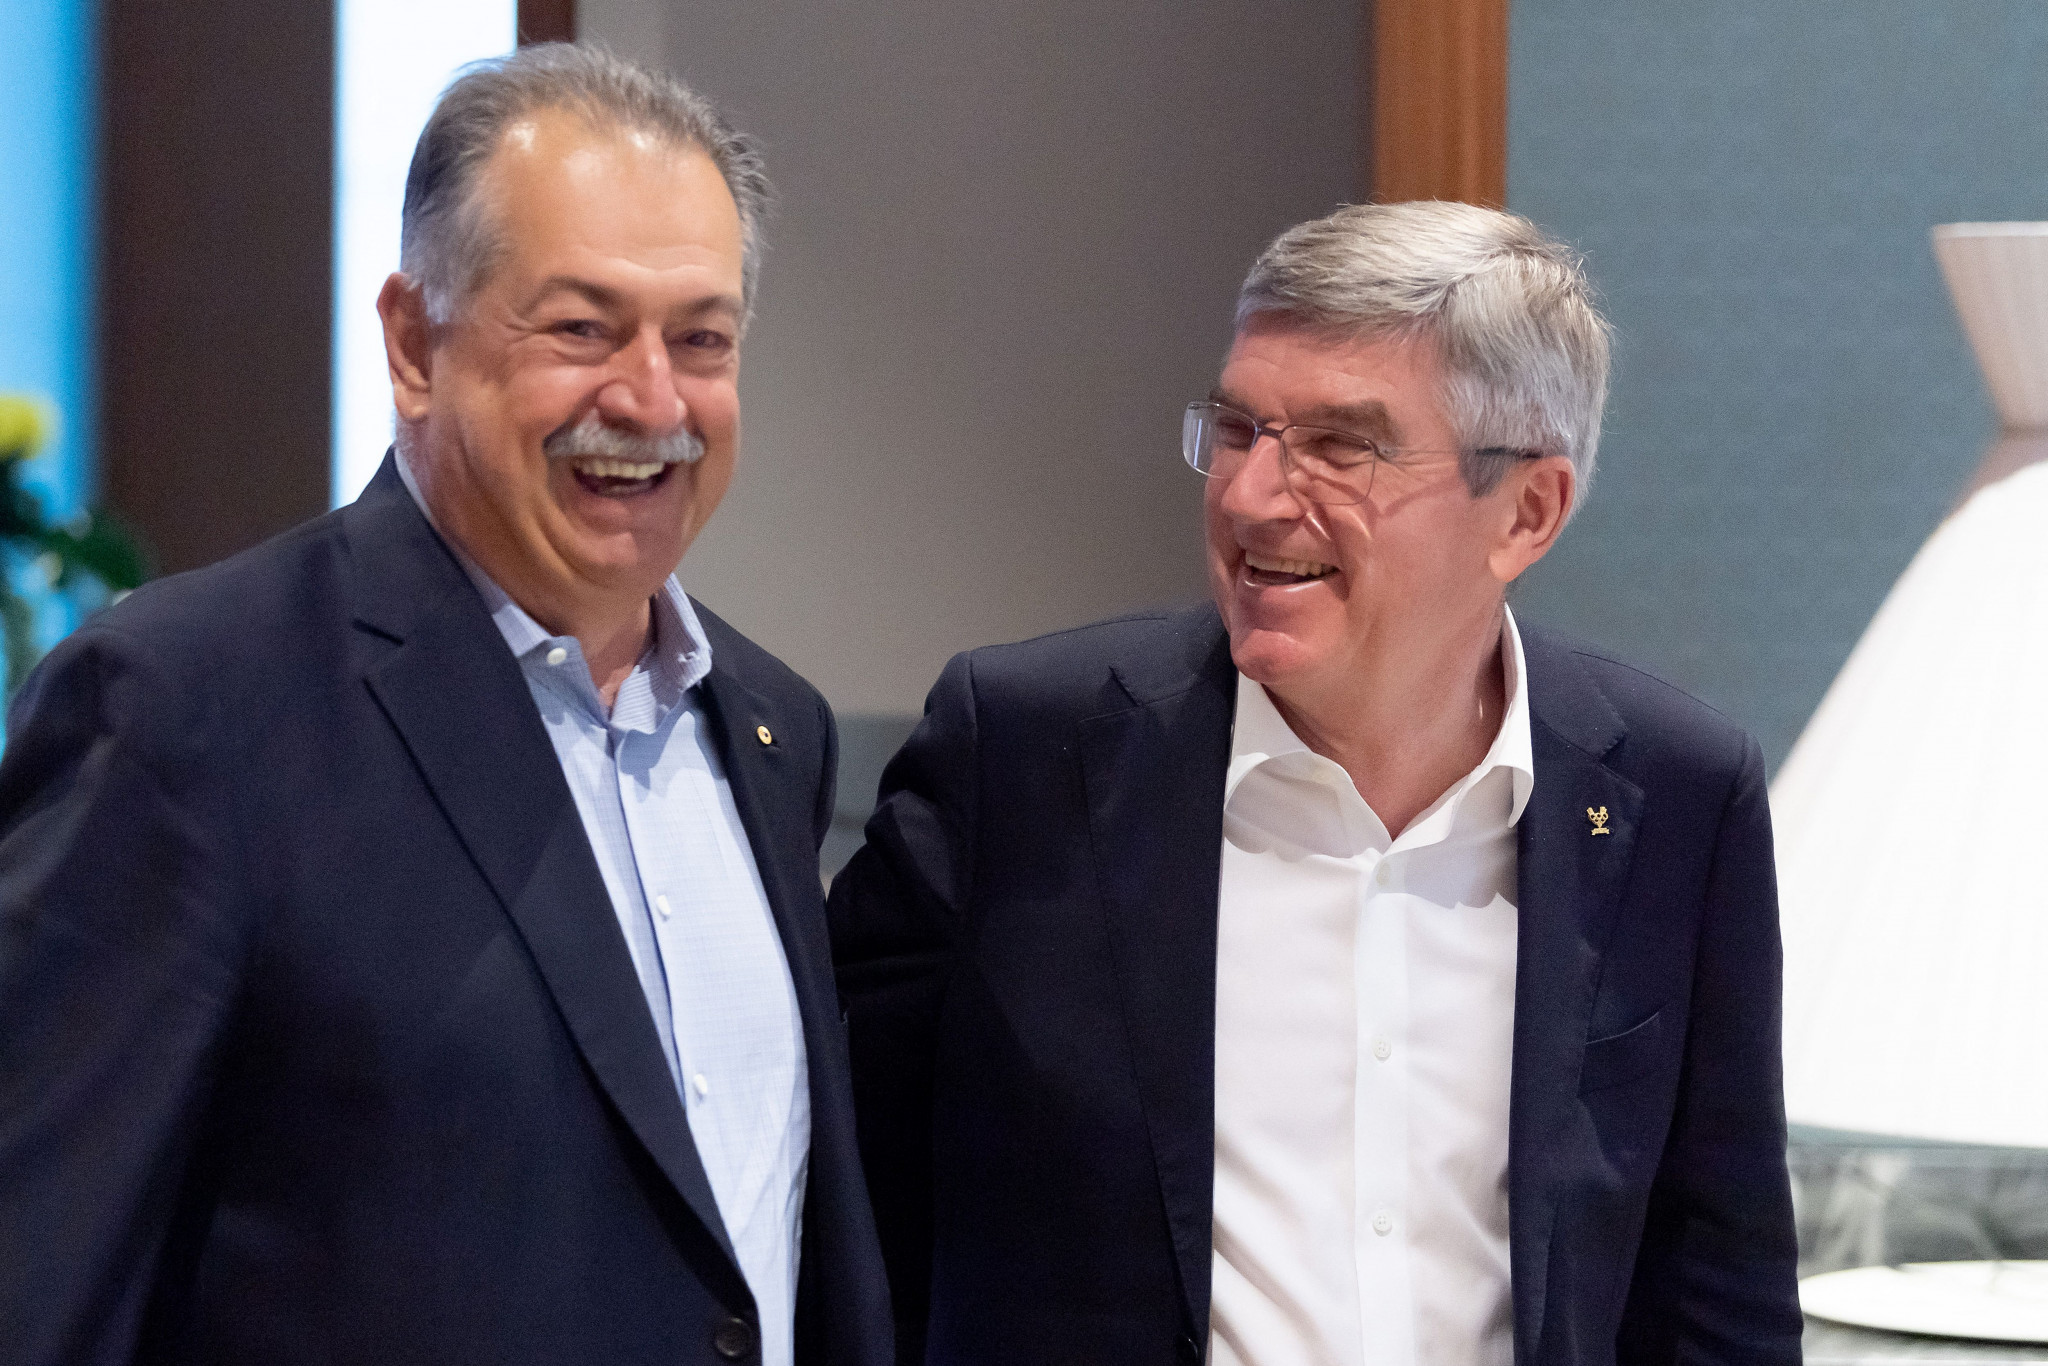 Brisbane 2032 President Andrew Liveris, left, has revealed they are looking for a 